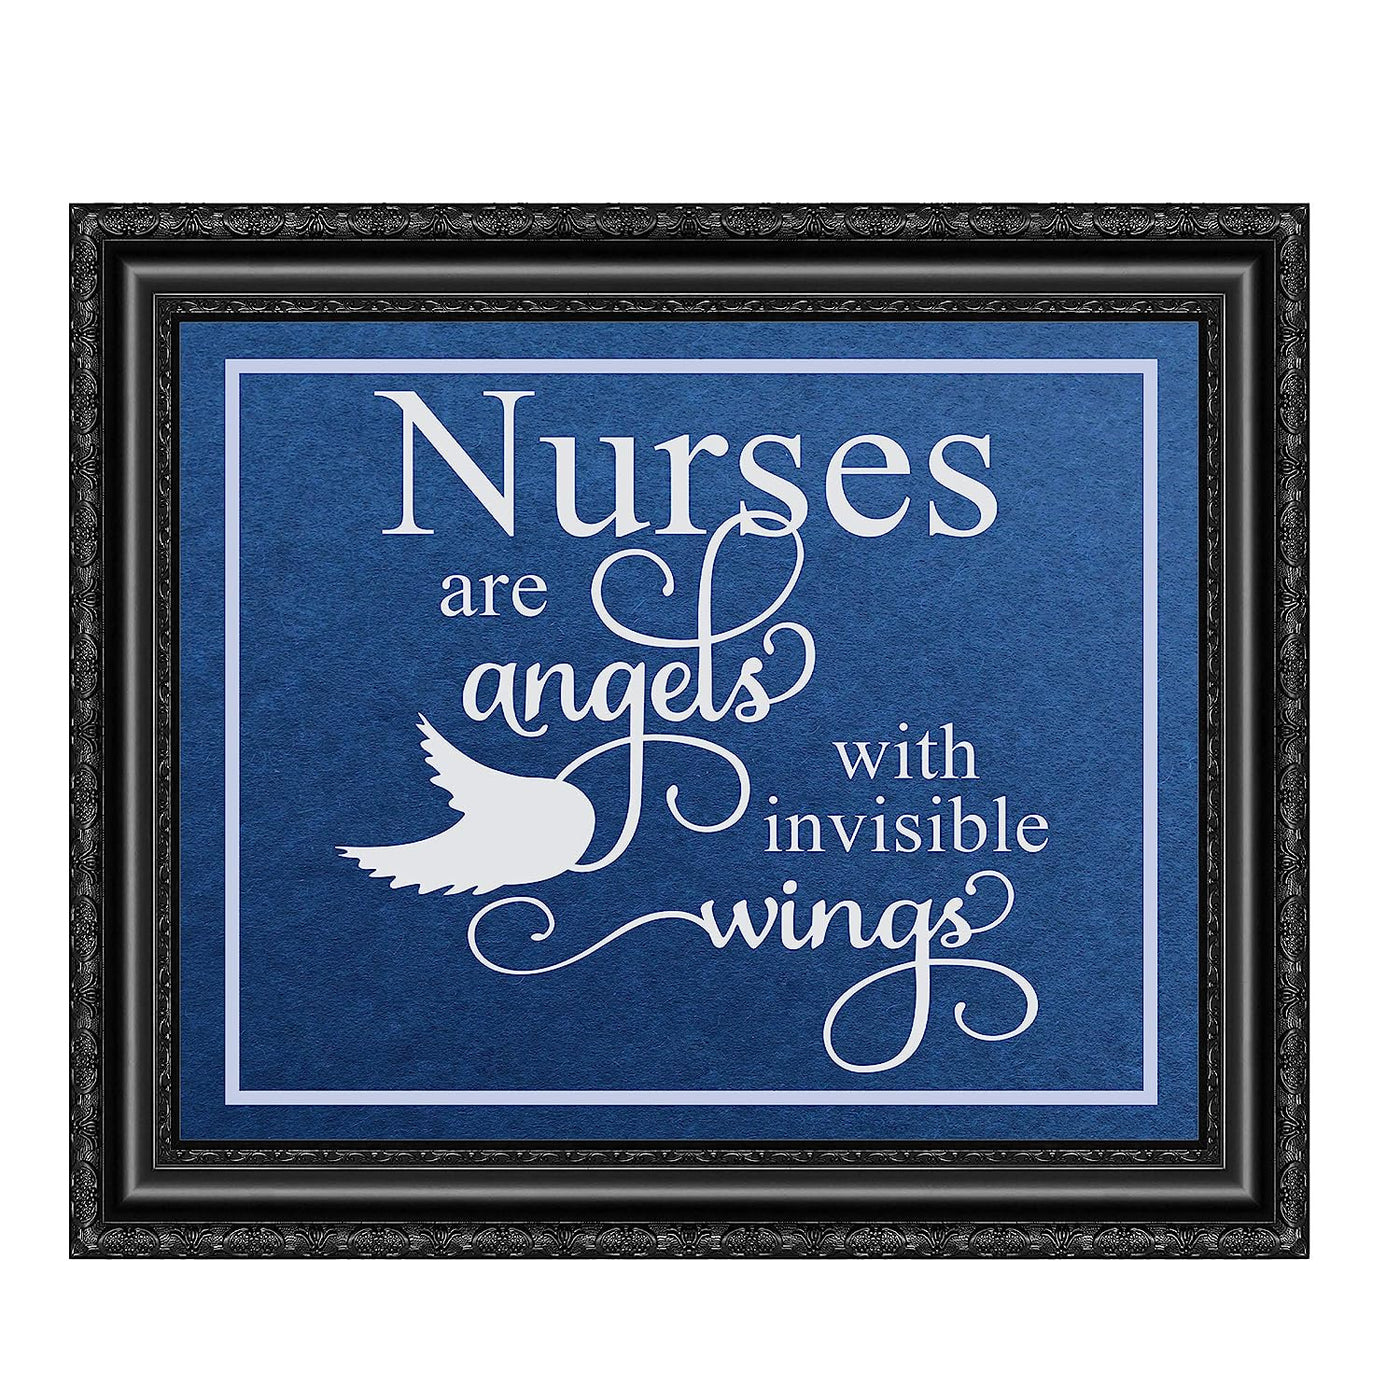 Nurses Are Angels With Invisible Wings- Inspirational Wall Sign - 10 x 8" Typographic Art Print-Ready to Frame. Motivational Home-Office-Nursing School-Clinic Decor. Great Gift of Appreciation!